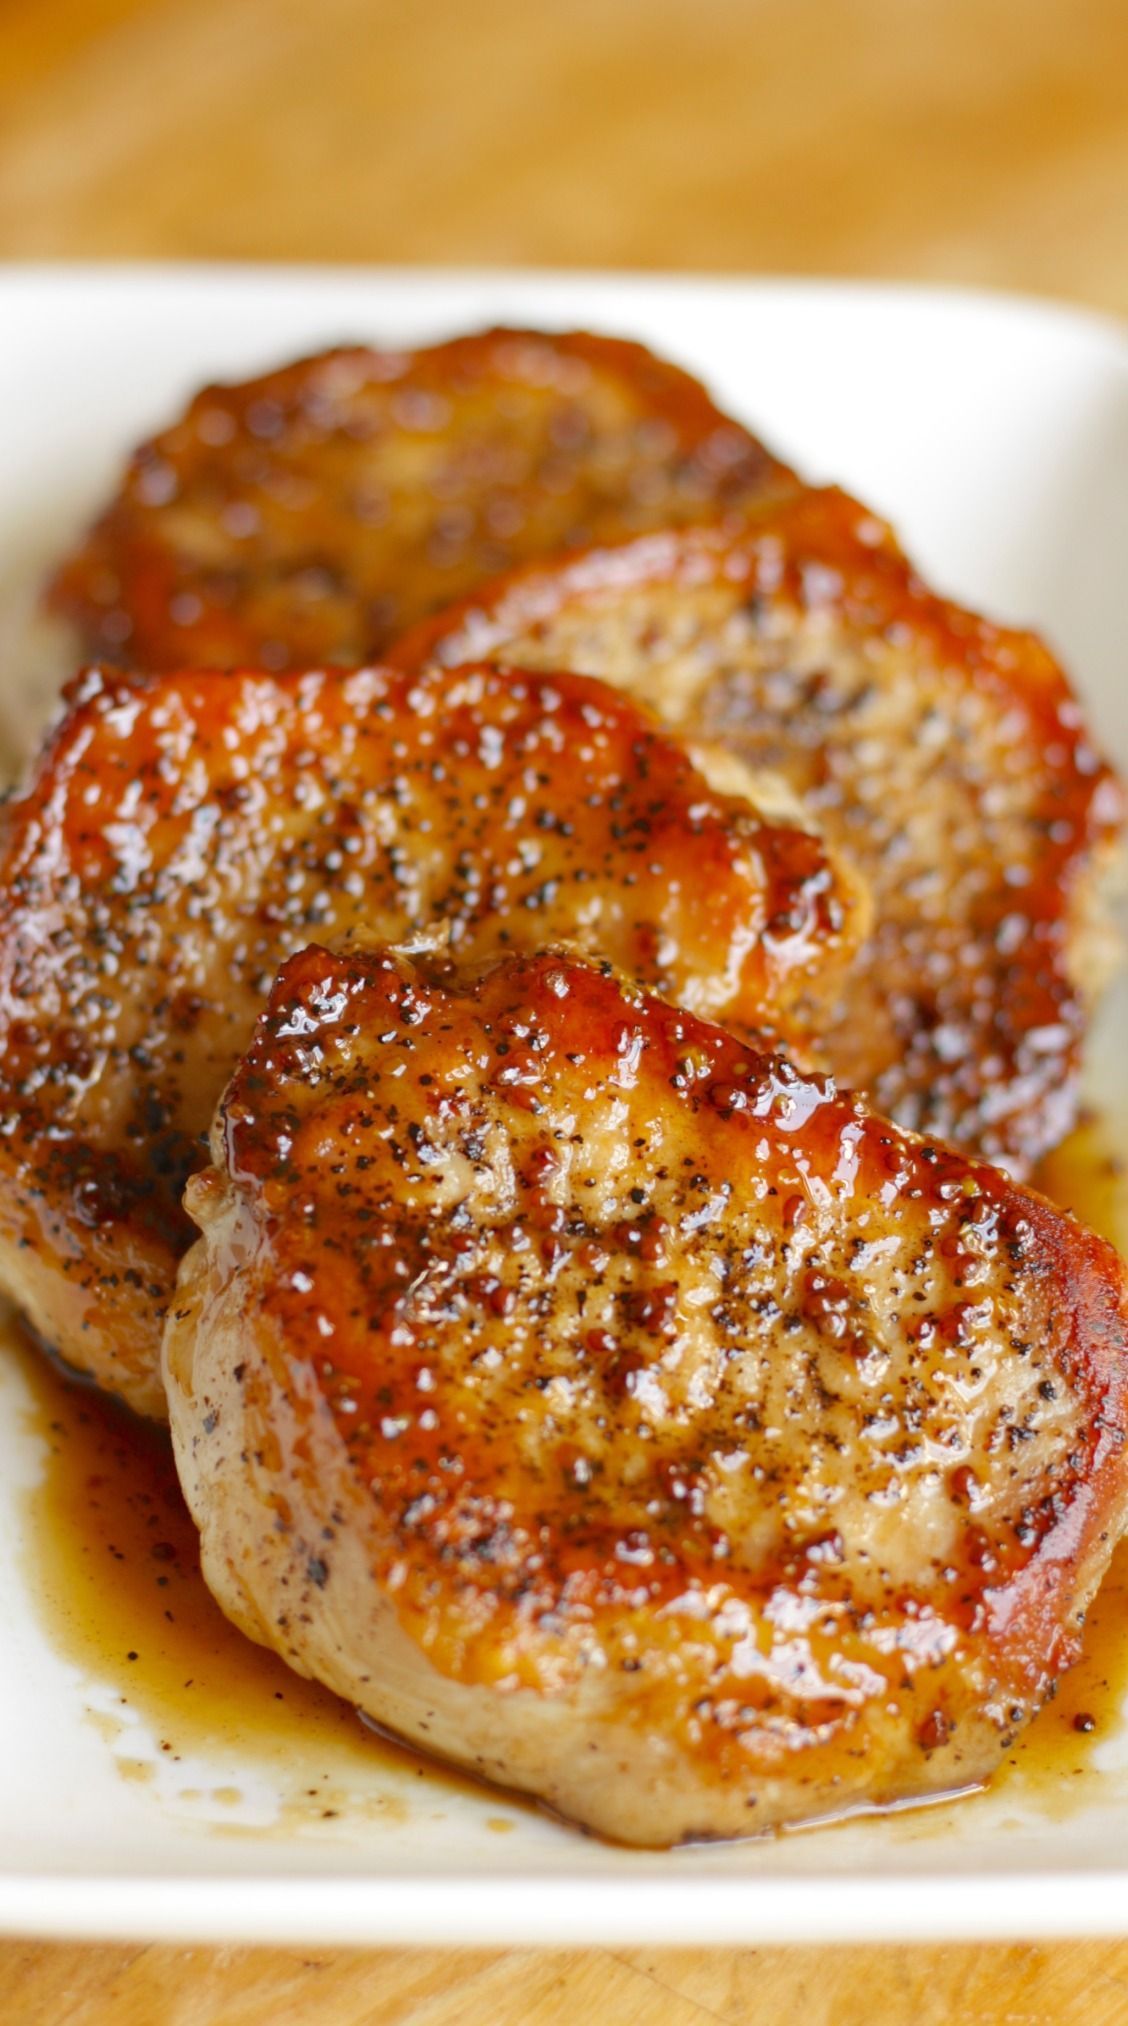 Apple Cider Pork Chops: These tasty apple cider pork chops are a five-ingredient main course that’ll be on your table in just 30